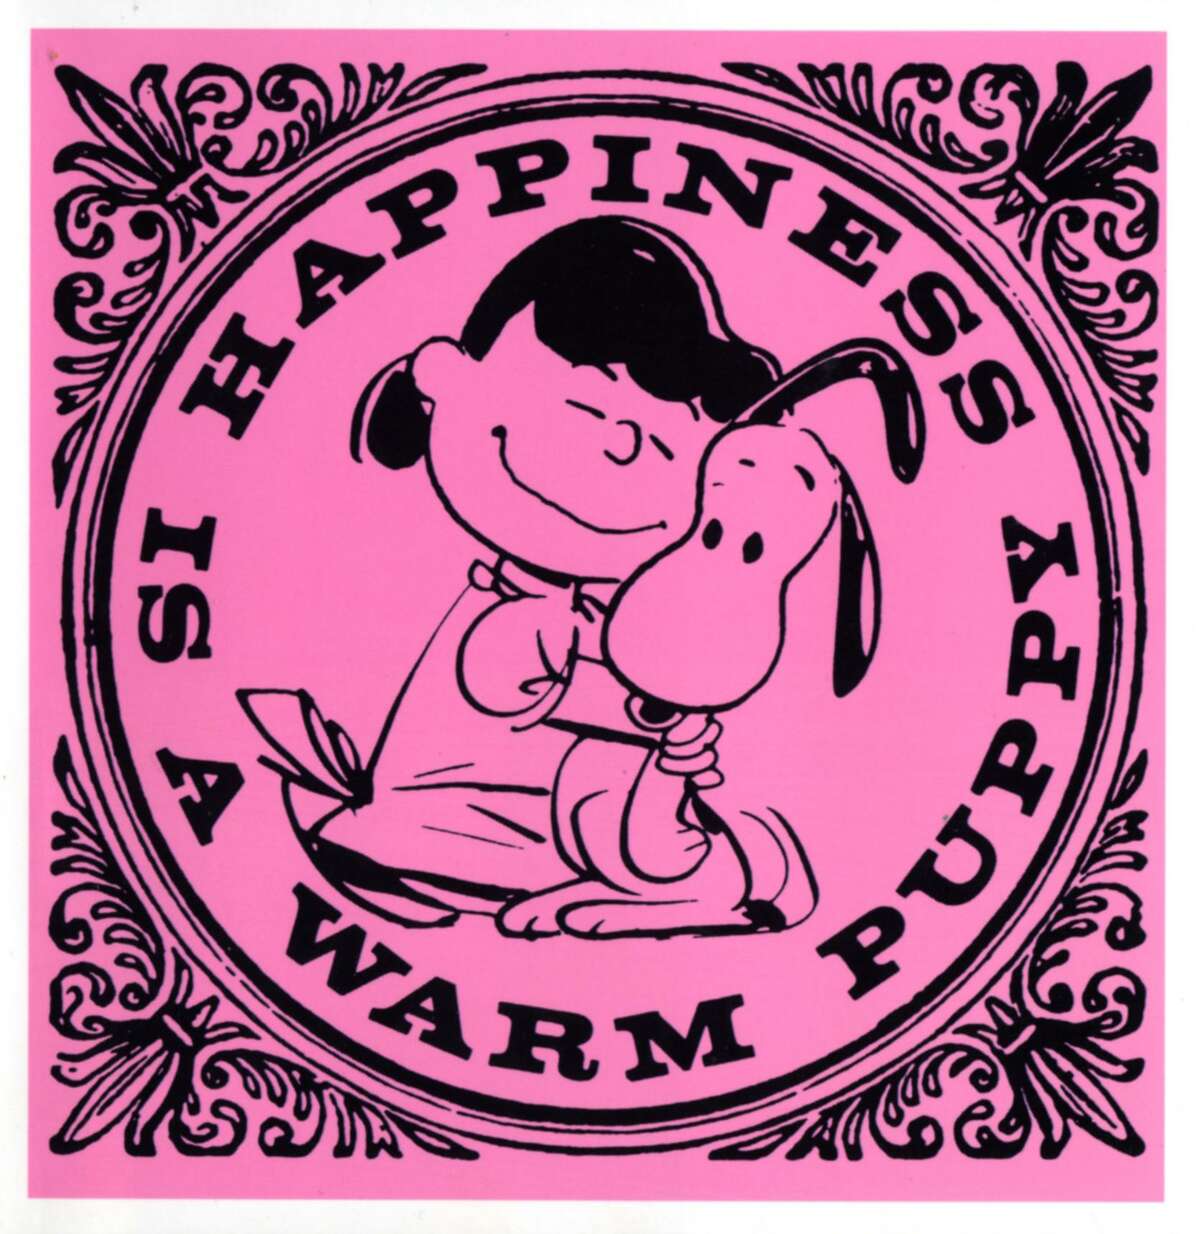 “Happiness is a Warm Puppy,” by Charles M. Schulz.